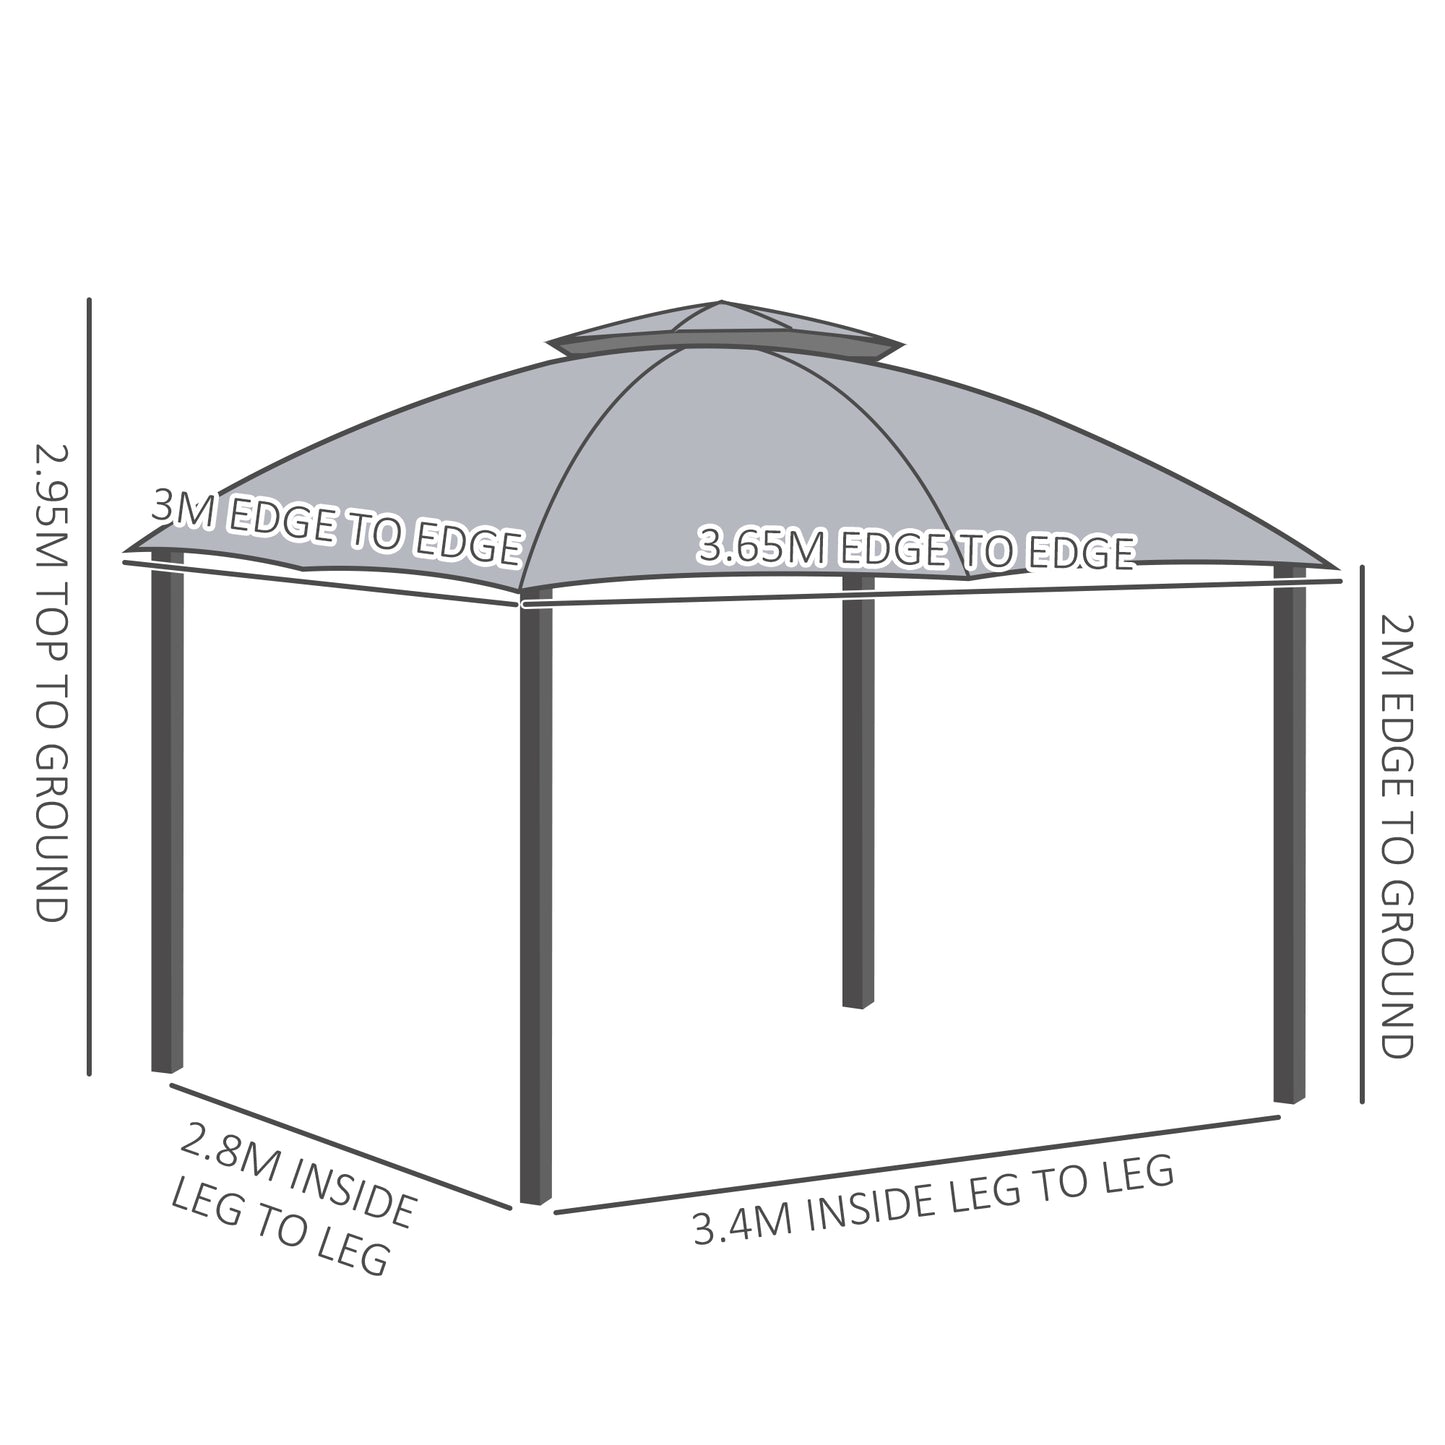 Outsunny 3.7 x 3(m) Metal Gazebo Canopy Party Tent Garden Patio Shelter with Netting Sidewalls & Double Tiered Roof, Grey